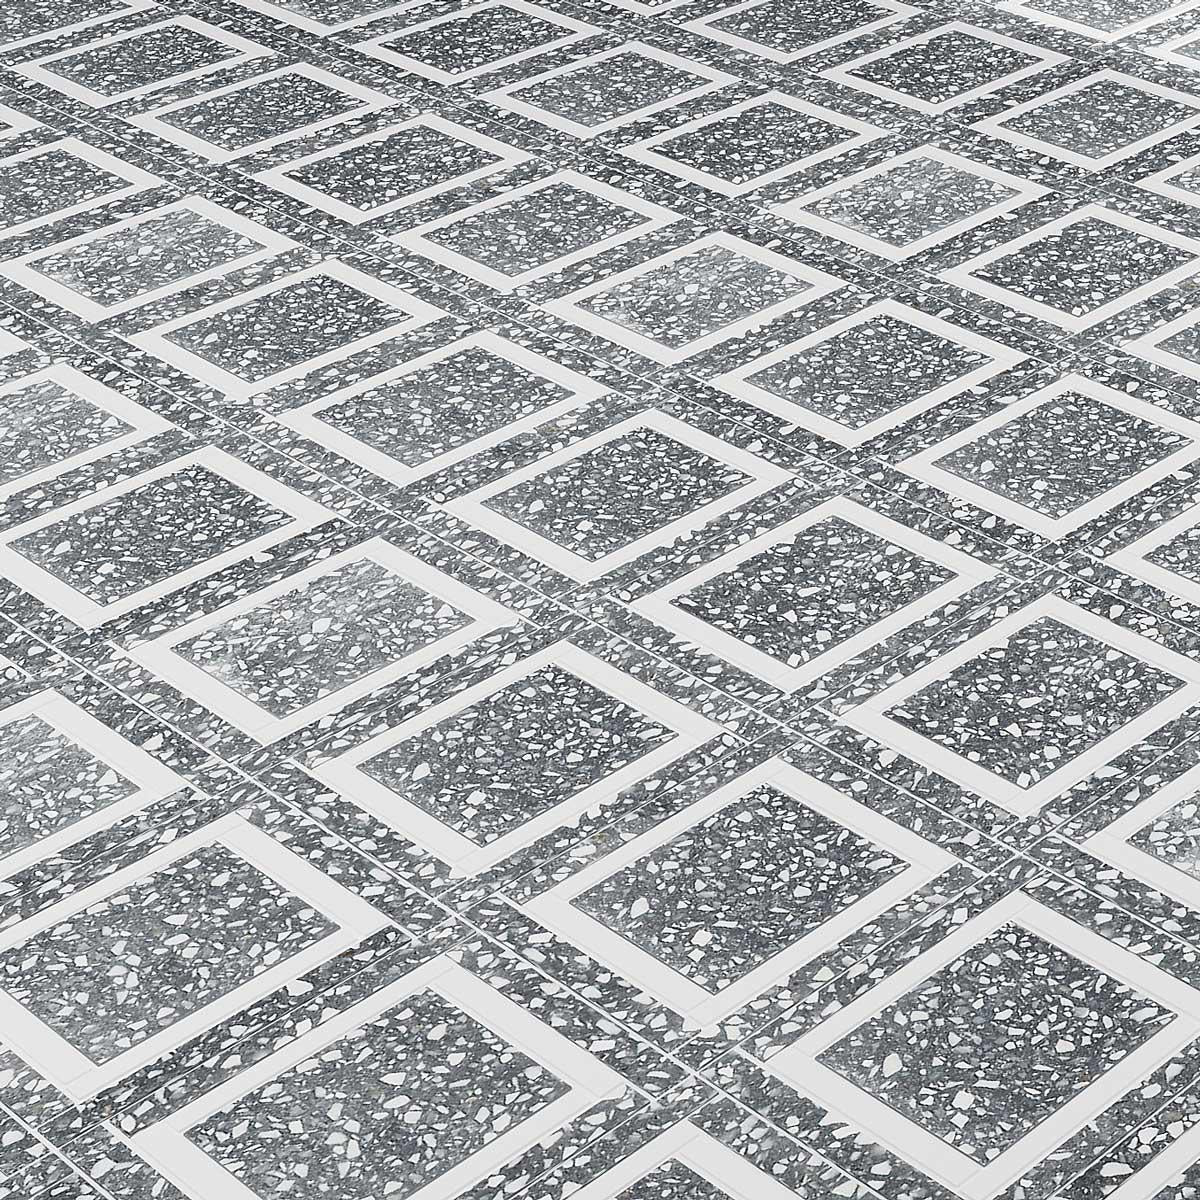 Speckled gray and white square patterned floor tile